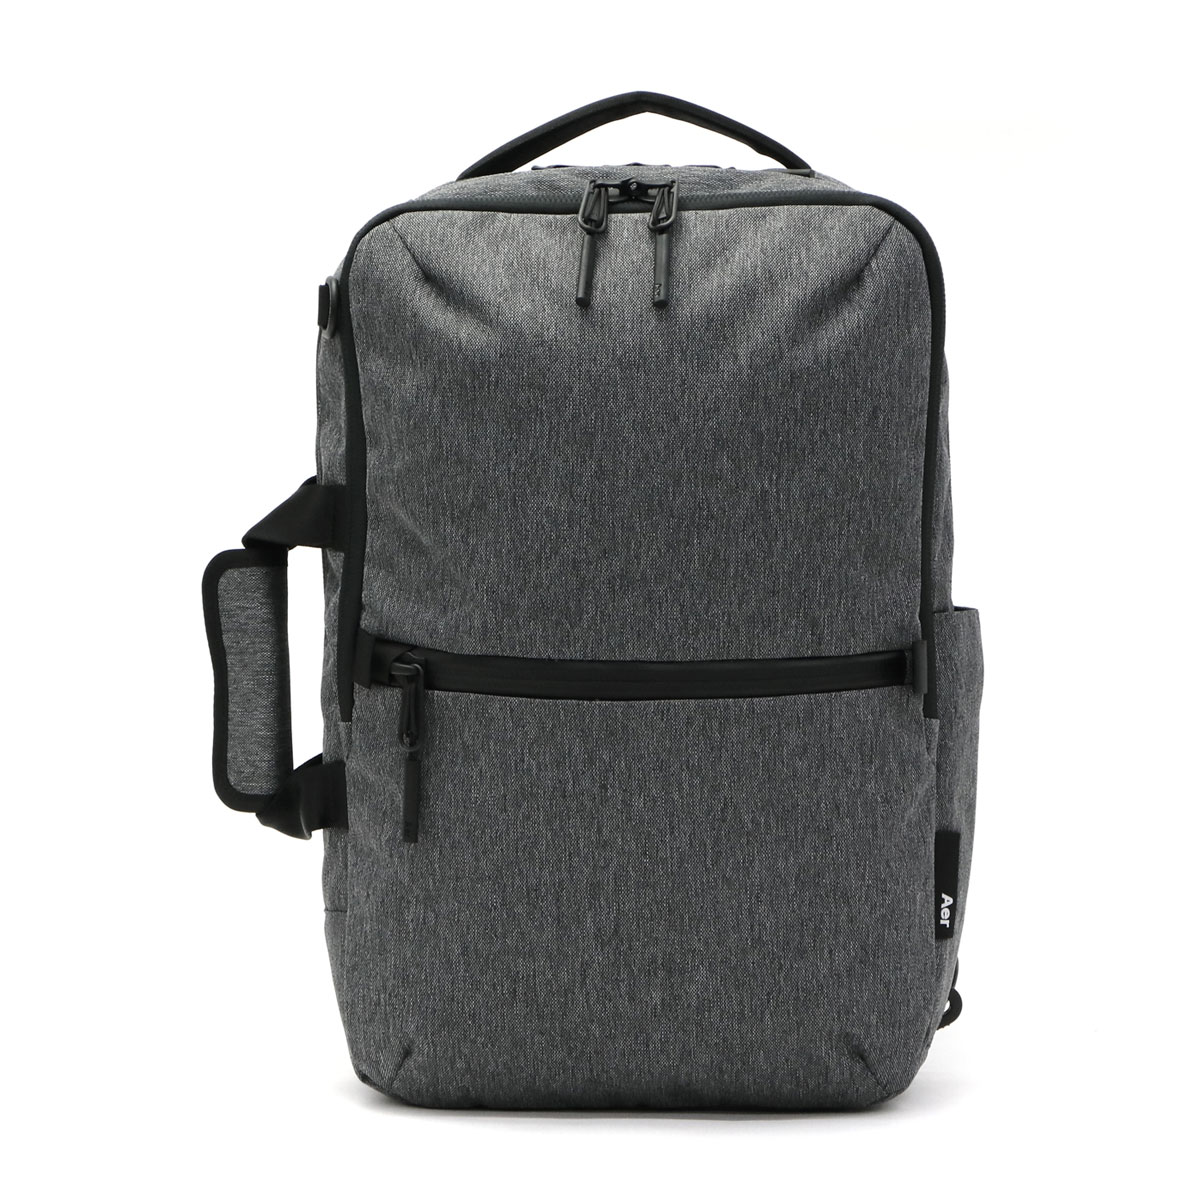 Aer エアー Travel Collection Flight Pack 2 3WAYバックパック 14L ...